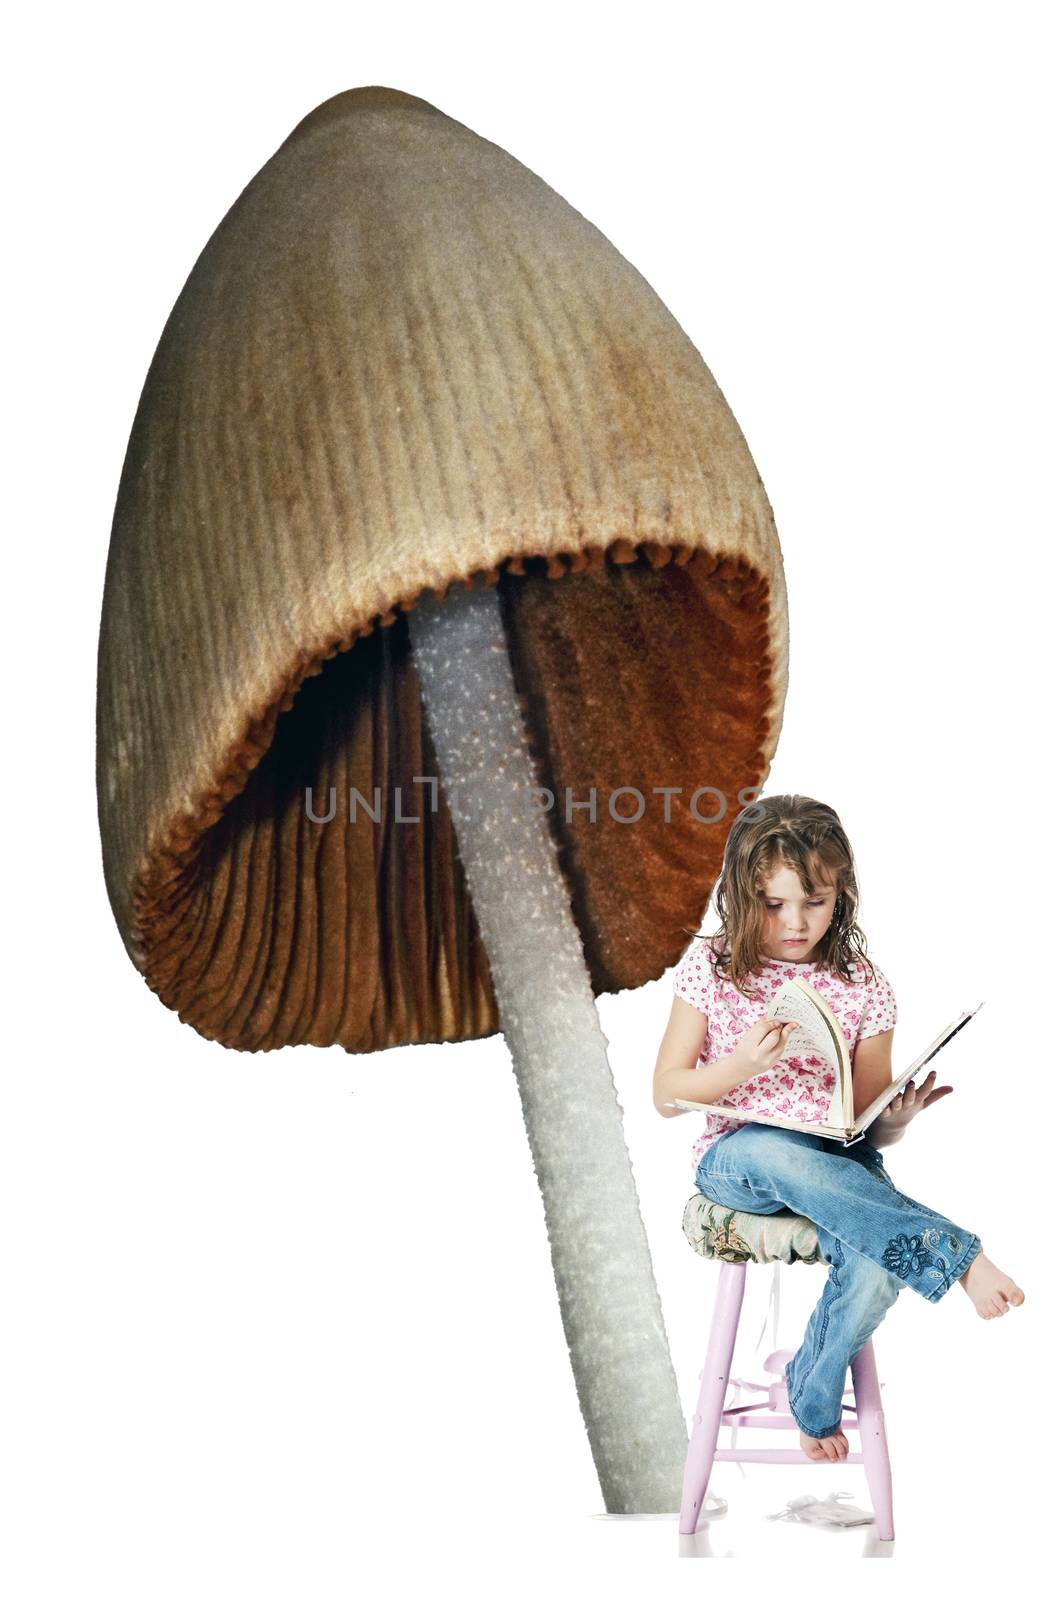 Little girl letting her imagination roam free while she reads under the shade of a giant mushroom.